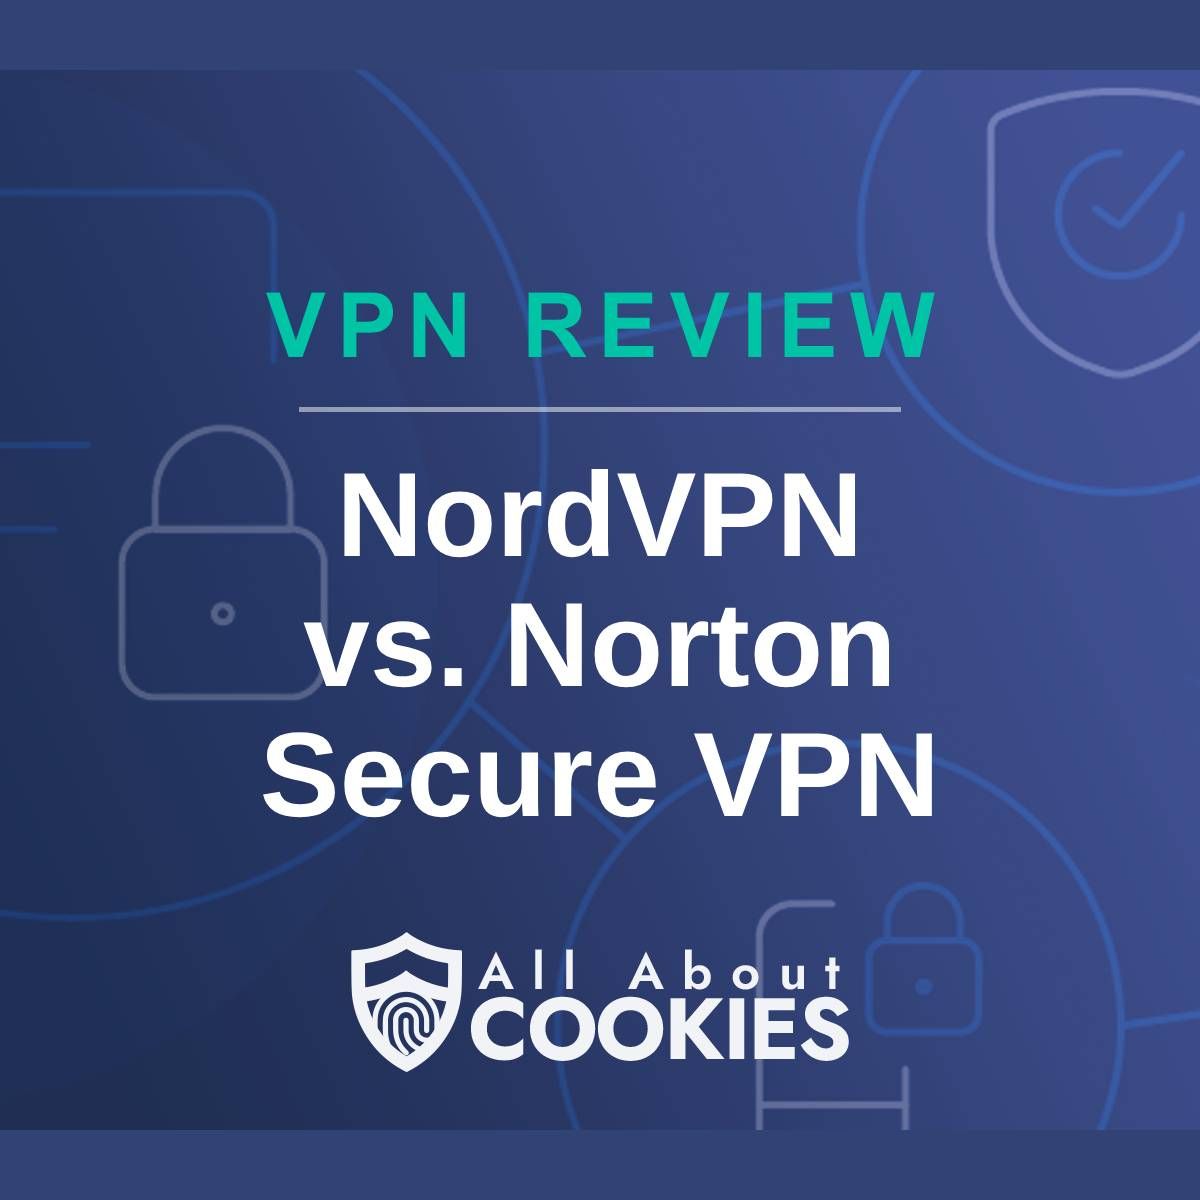 A blue background with images of locks and shields and the text &quot;NordVPN vs. Norton Secure VPN&quot;